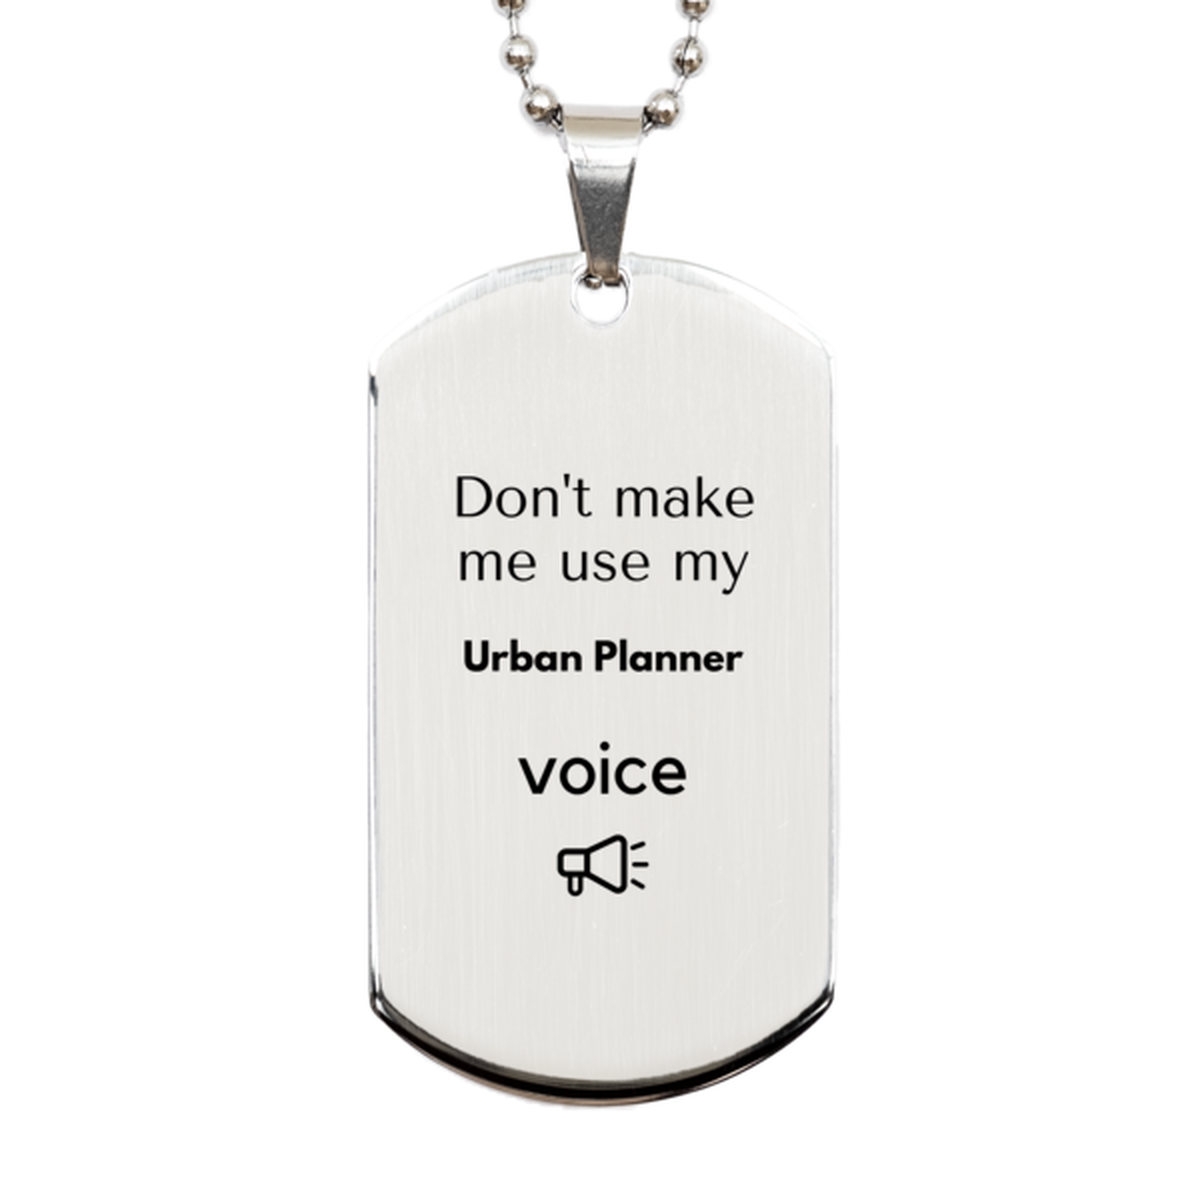 Don't make me use my Urban Planner voice, Sarcasm Urban Planner Gifts, Christmas Urban Planner Silver Dog Tag Birthday Unique Gifts For Urban Planner Coworkers, Men, Women, Colleague, Friends